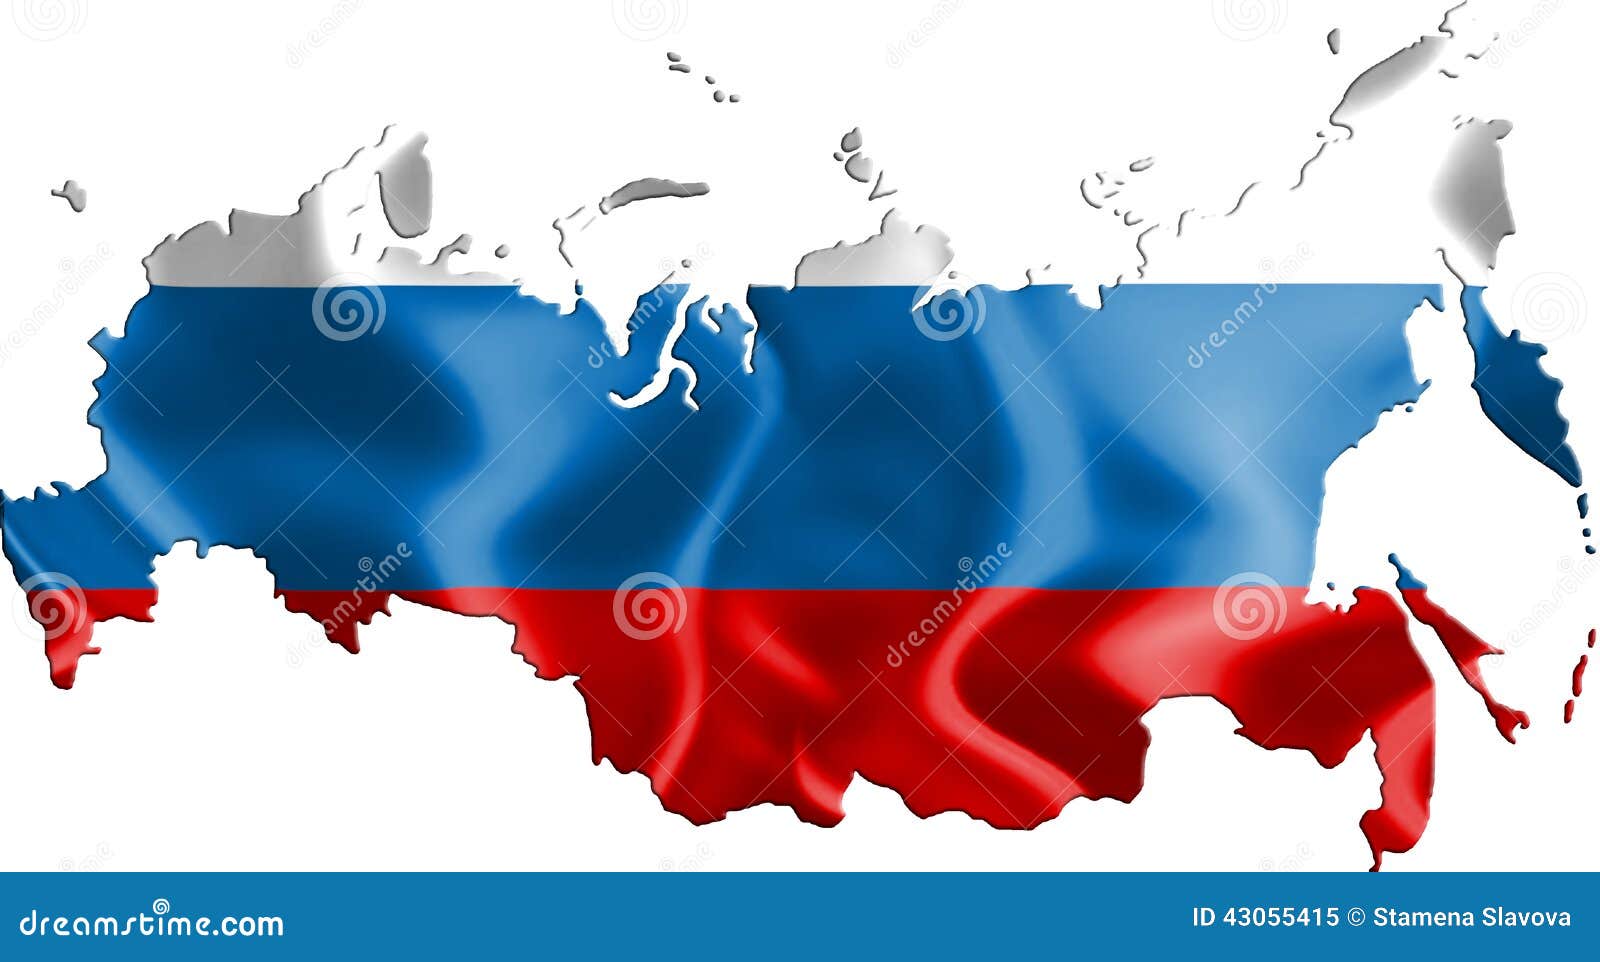 clipart russia map - photo #46